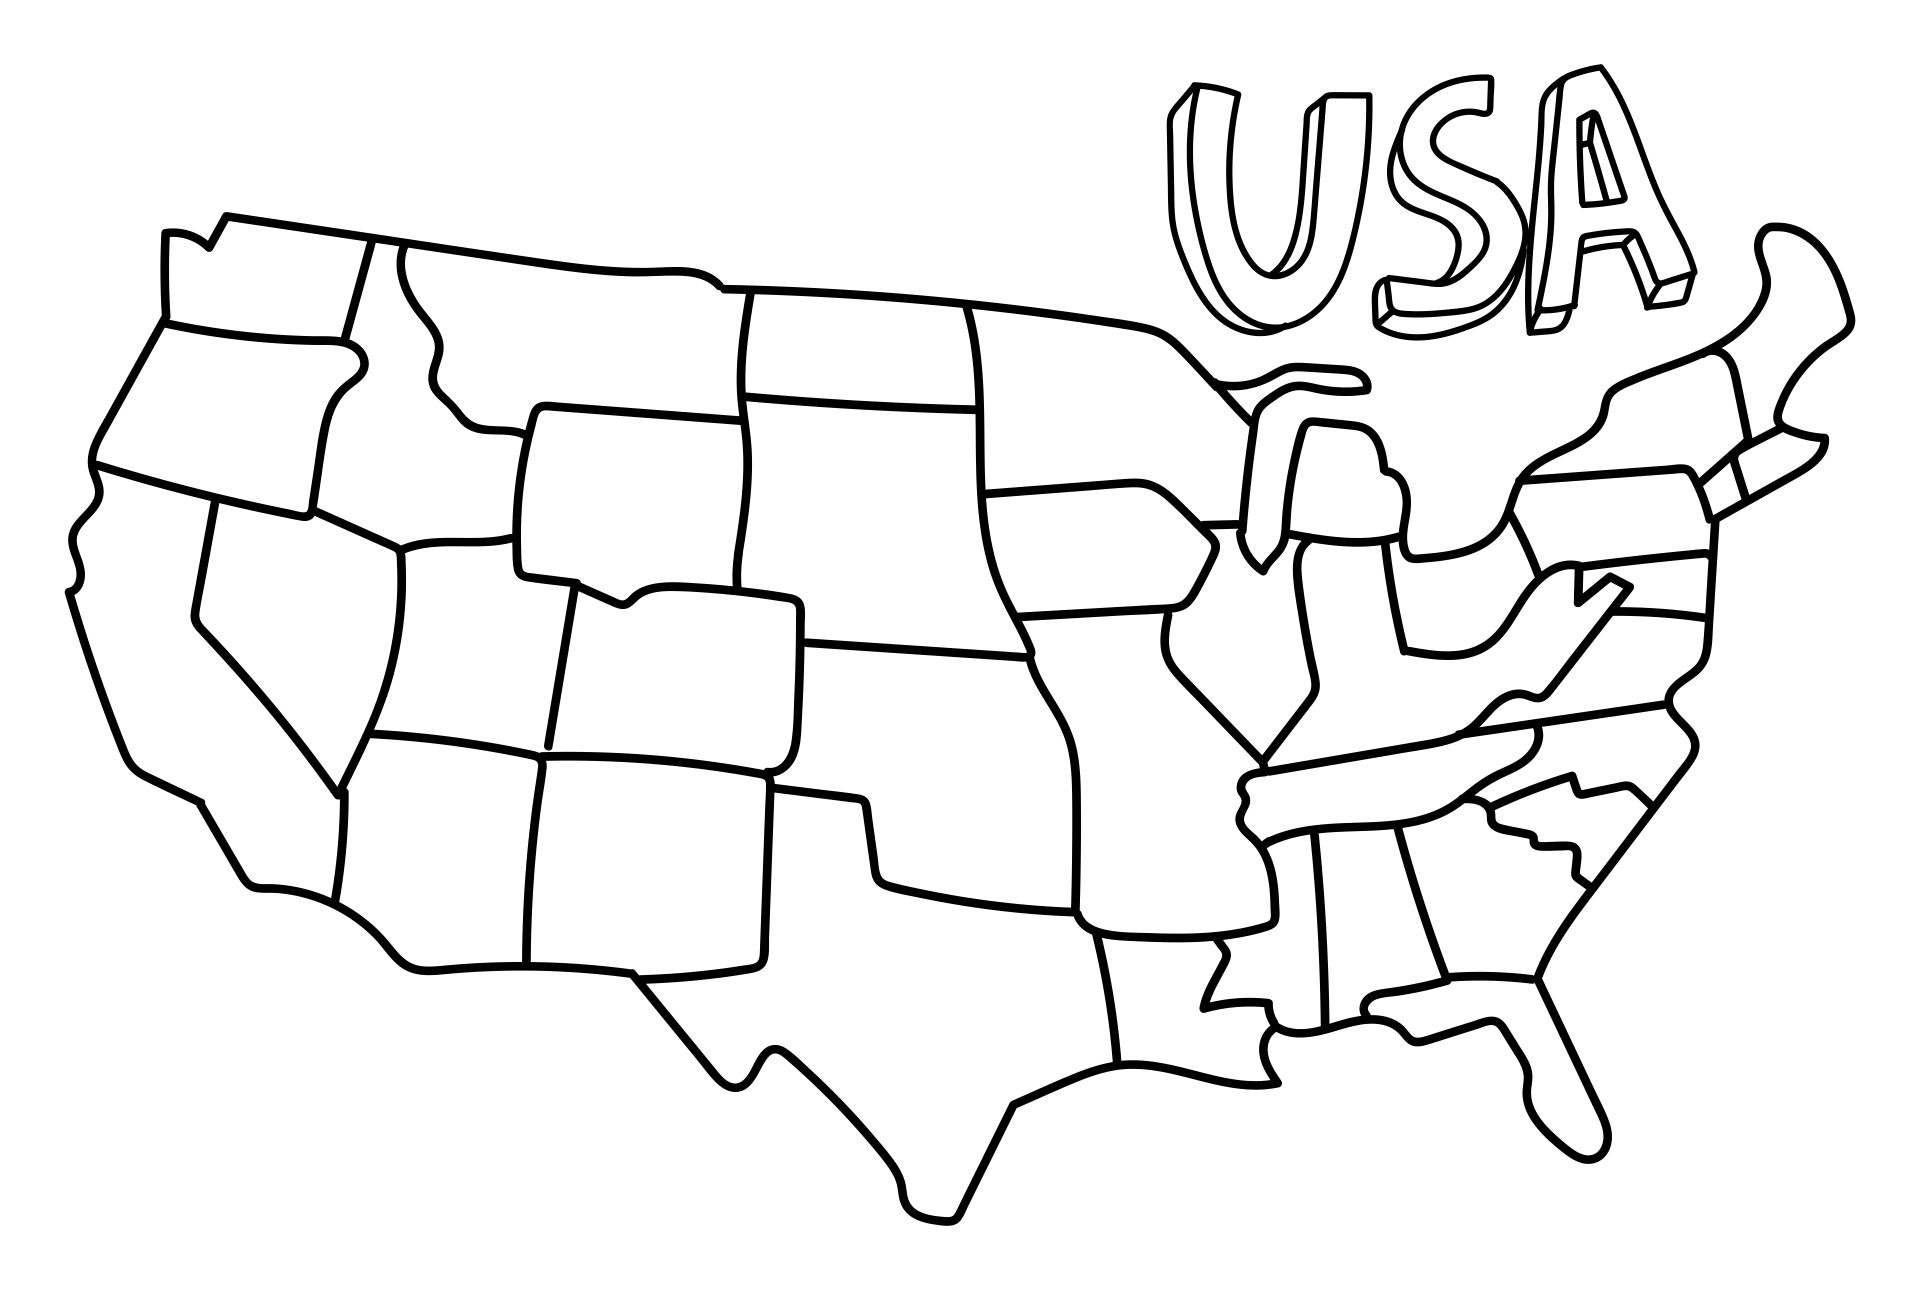 Free Printable Map Of The United States To Color